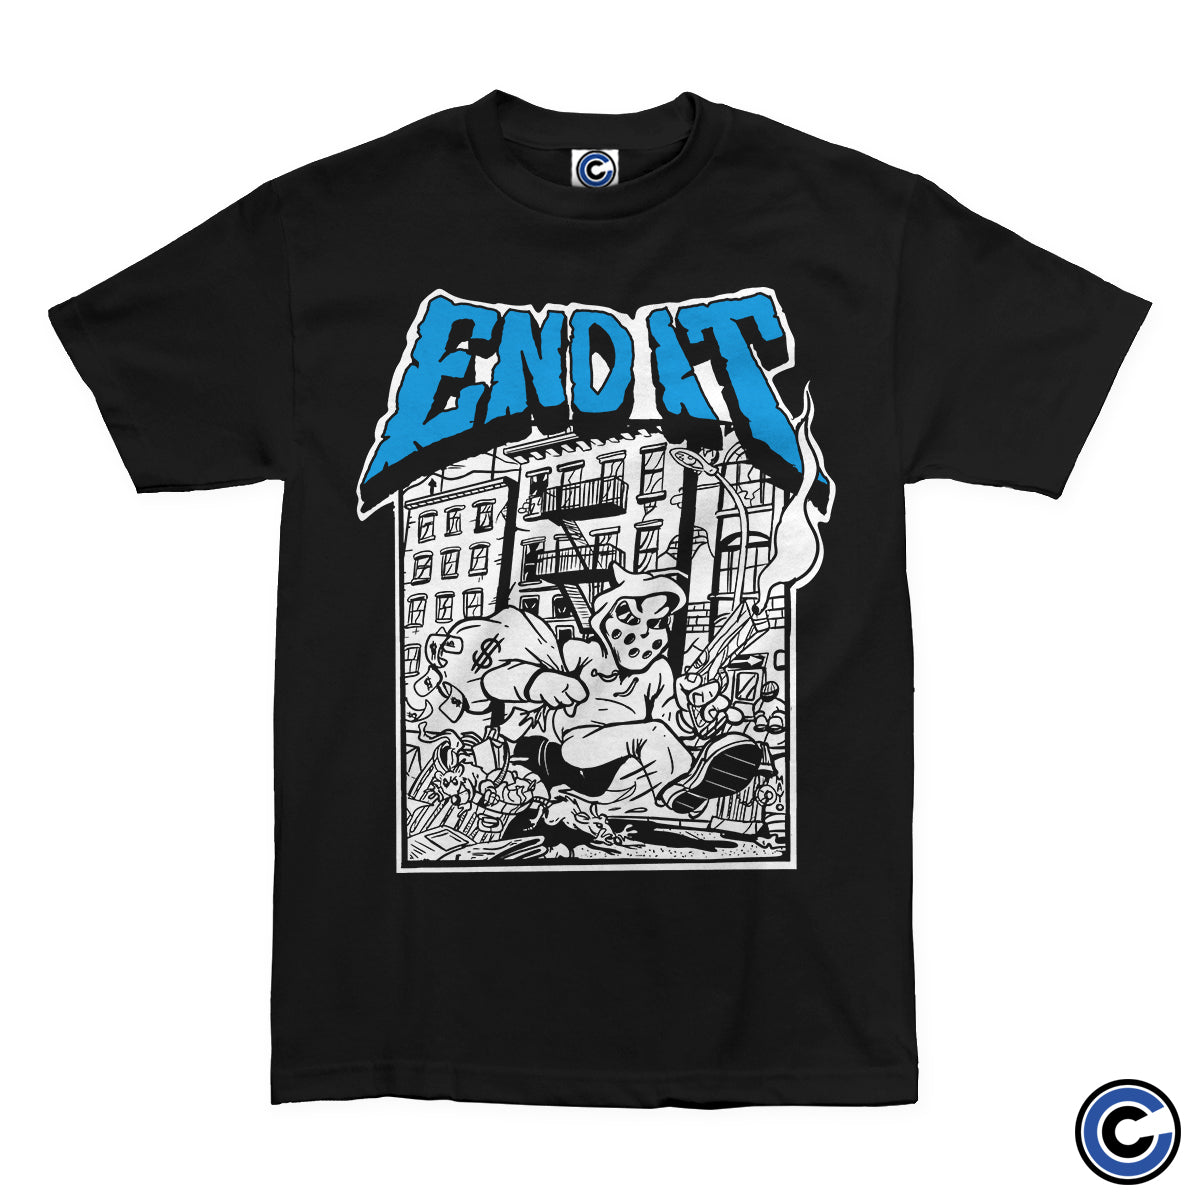 End It "Robber" Shirt